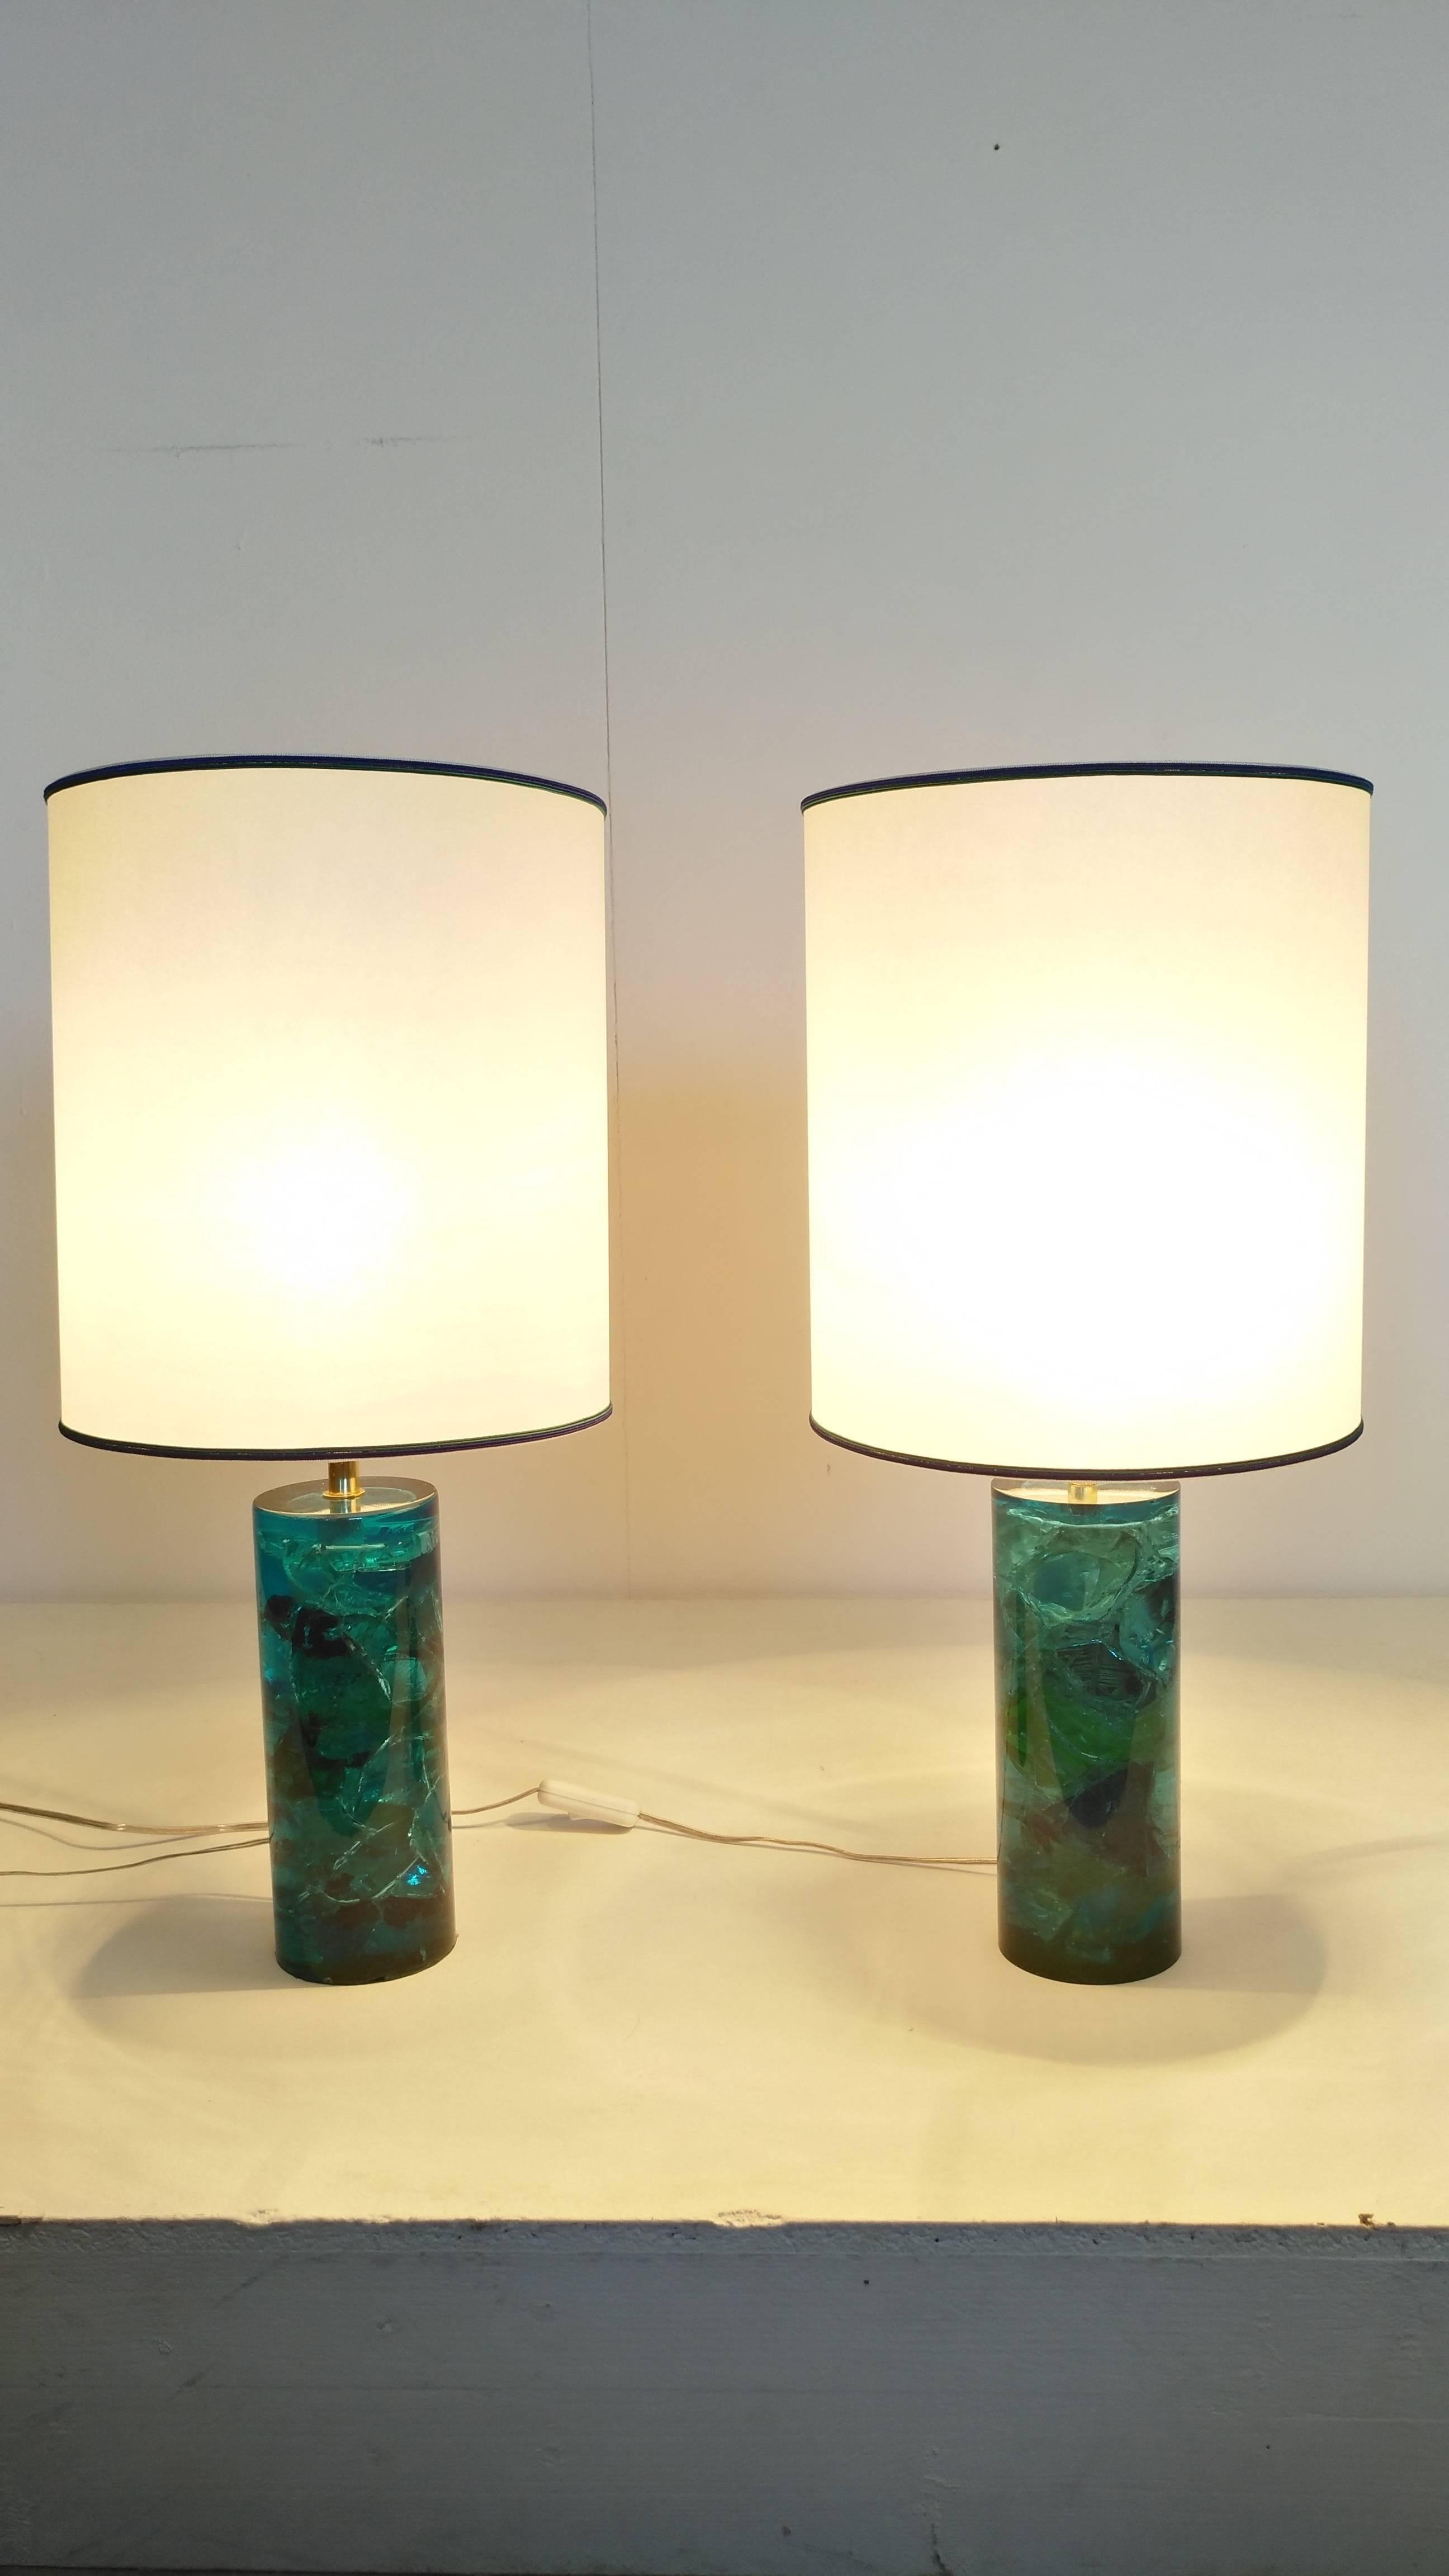 Beautiful table lamps made in blue fractal resin, original and special experimental work from the 1970s, when strange materials and good design were used by the artists
France 1970 attributed to Pierre Giraudon
Functional wire system and new shade